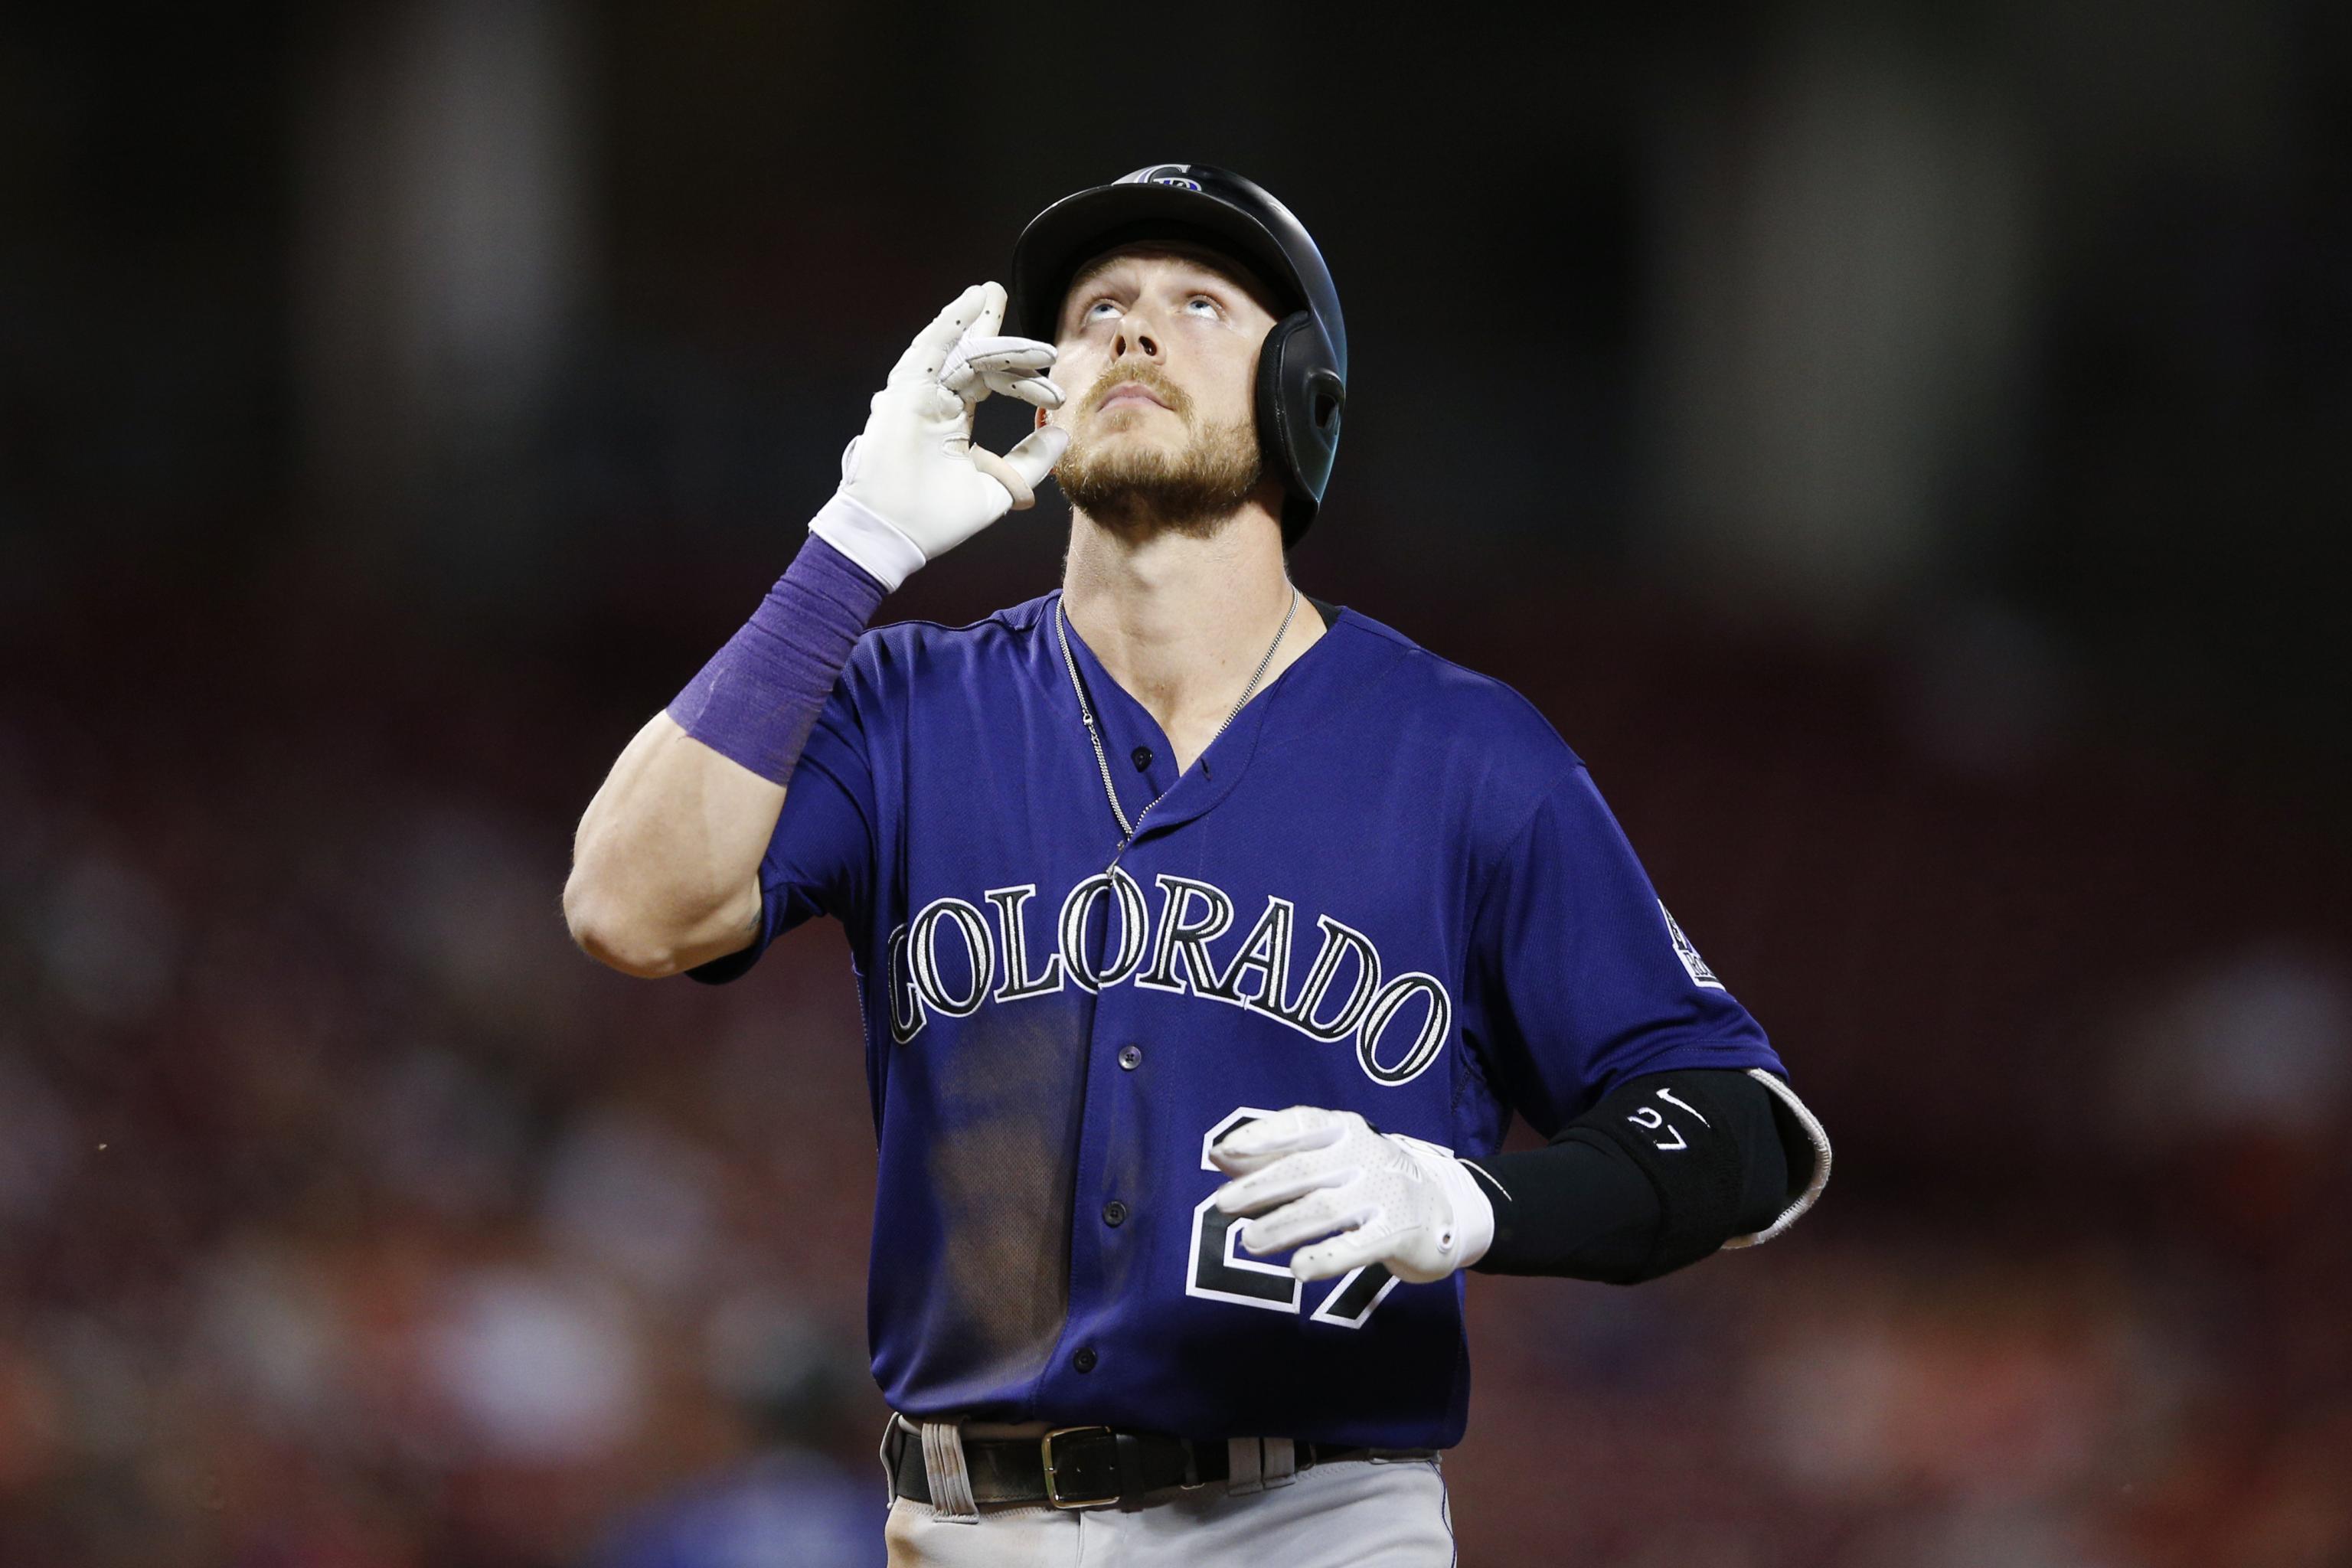 Trevor Story, COL//Opening Day at ARI, April 4, 2016